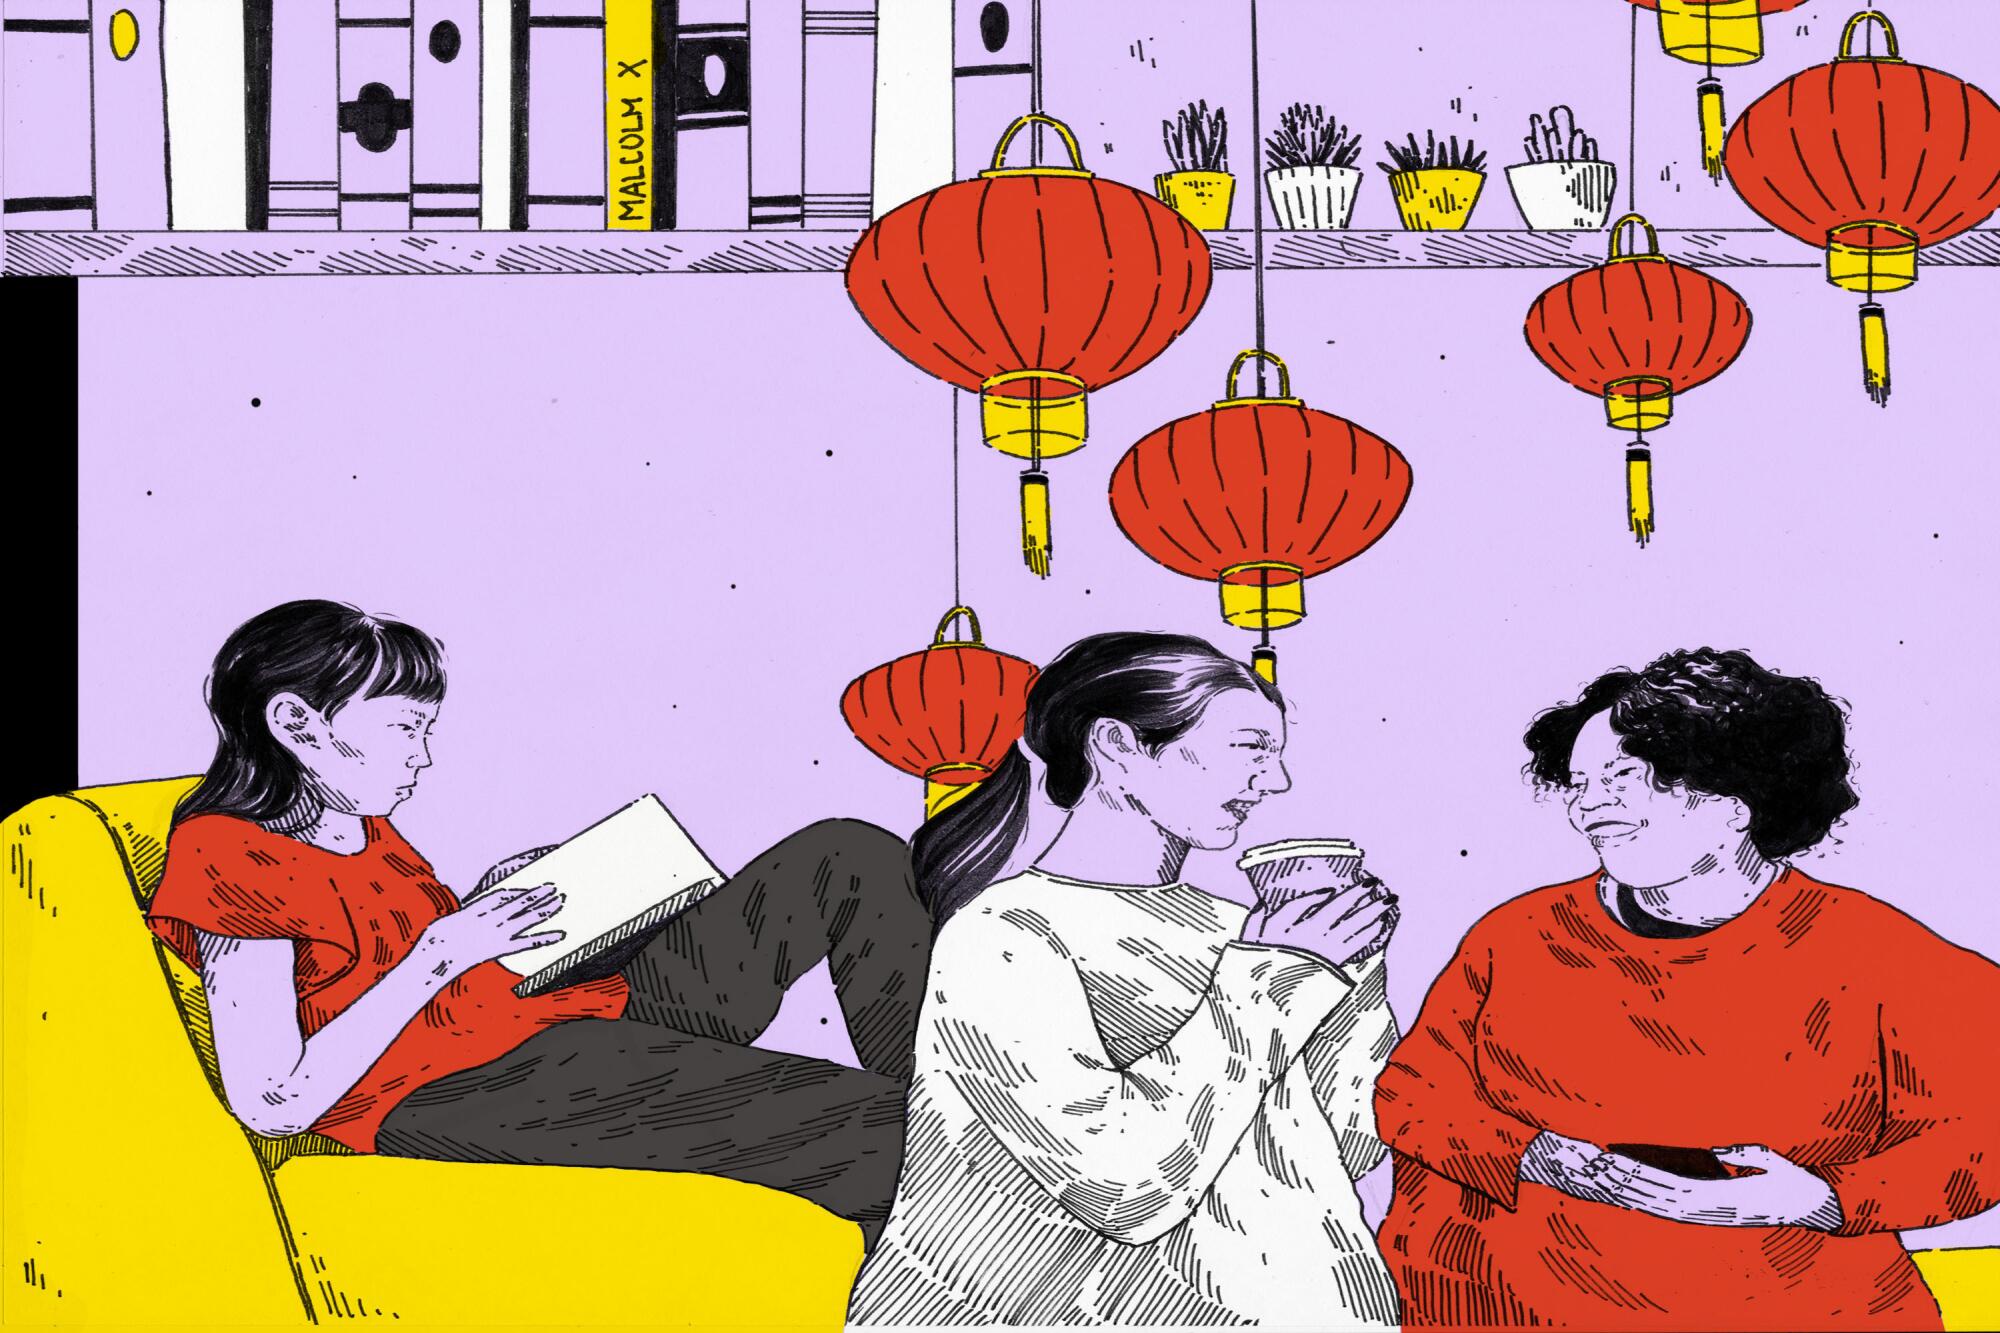 Illustration shows a person reading a book and people talking.